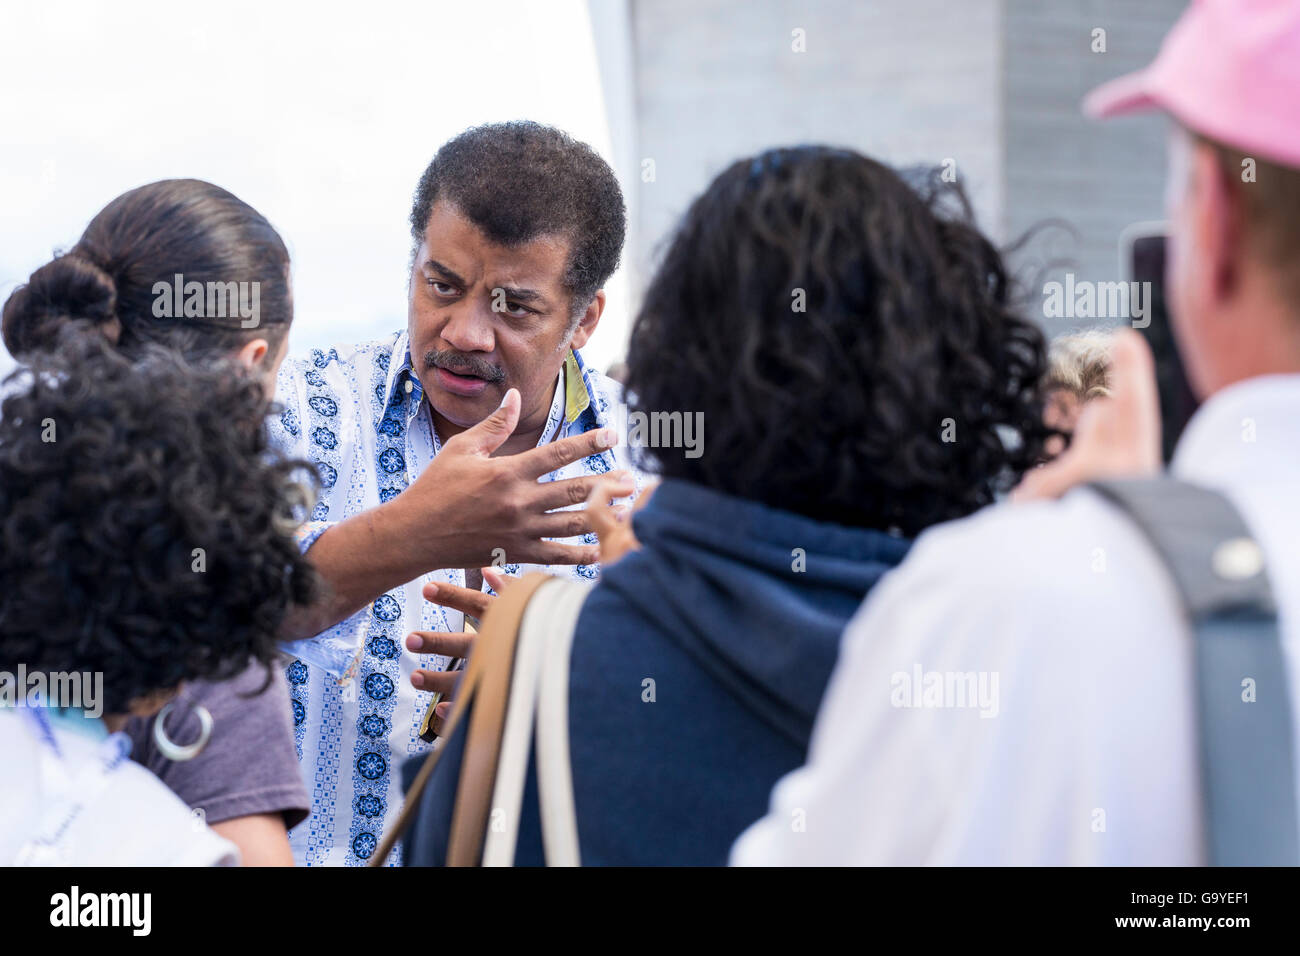 Neil deGrasse Tyson talking with fans at the Starmus festival in the Auditorio Adan Martin, Santa Cruz de Tenerife.He is an American astrophysicist, cosmologist, author, and science communicator. Canary Islands, Spain Stock Photo